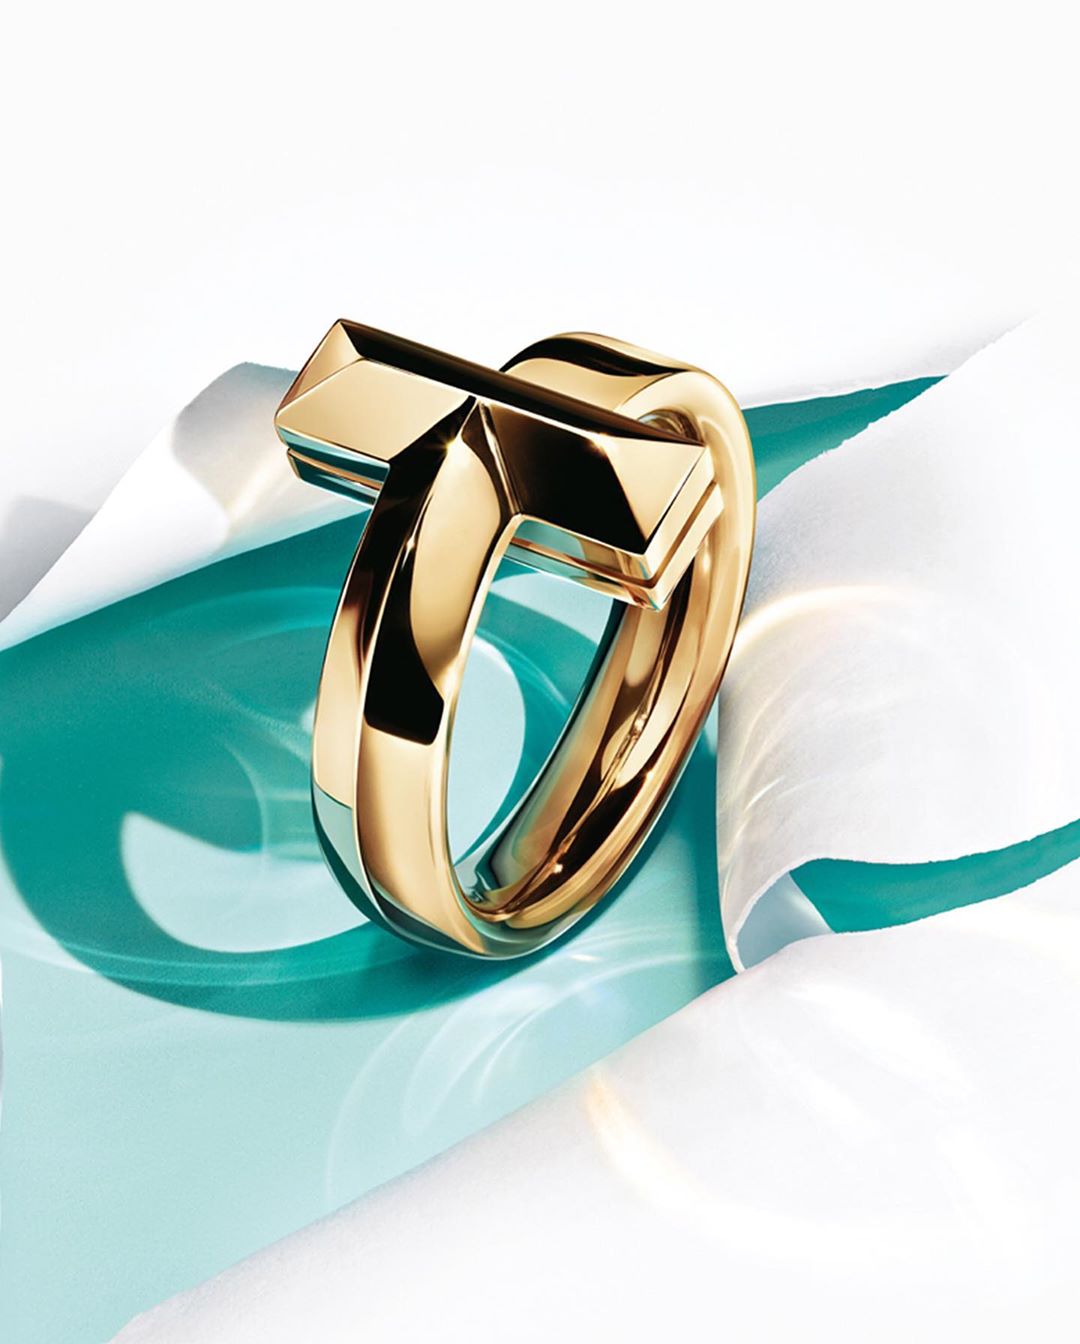 Tiffany & Co. - Go for the gold. The Tiffany T1 collection—now in 18k yellow gold—takes unbreakable to a whole new level. Tap to set the standard and discover more via the link in bio. #TiffanyT1 #Tif...